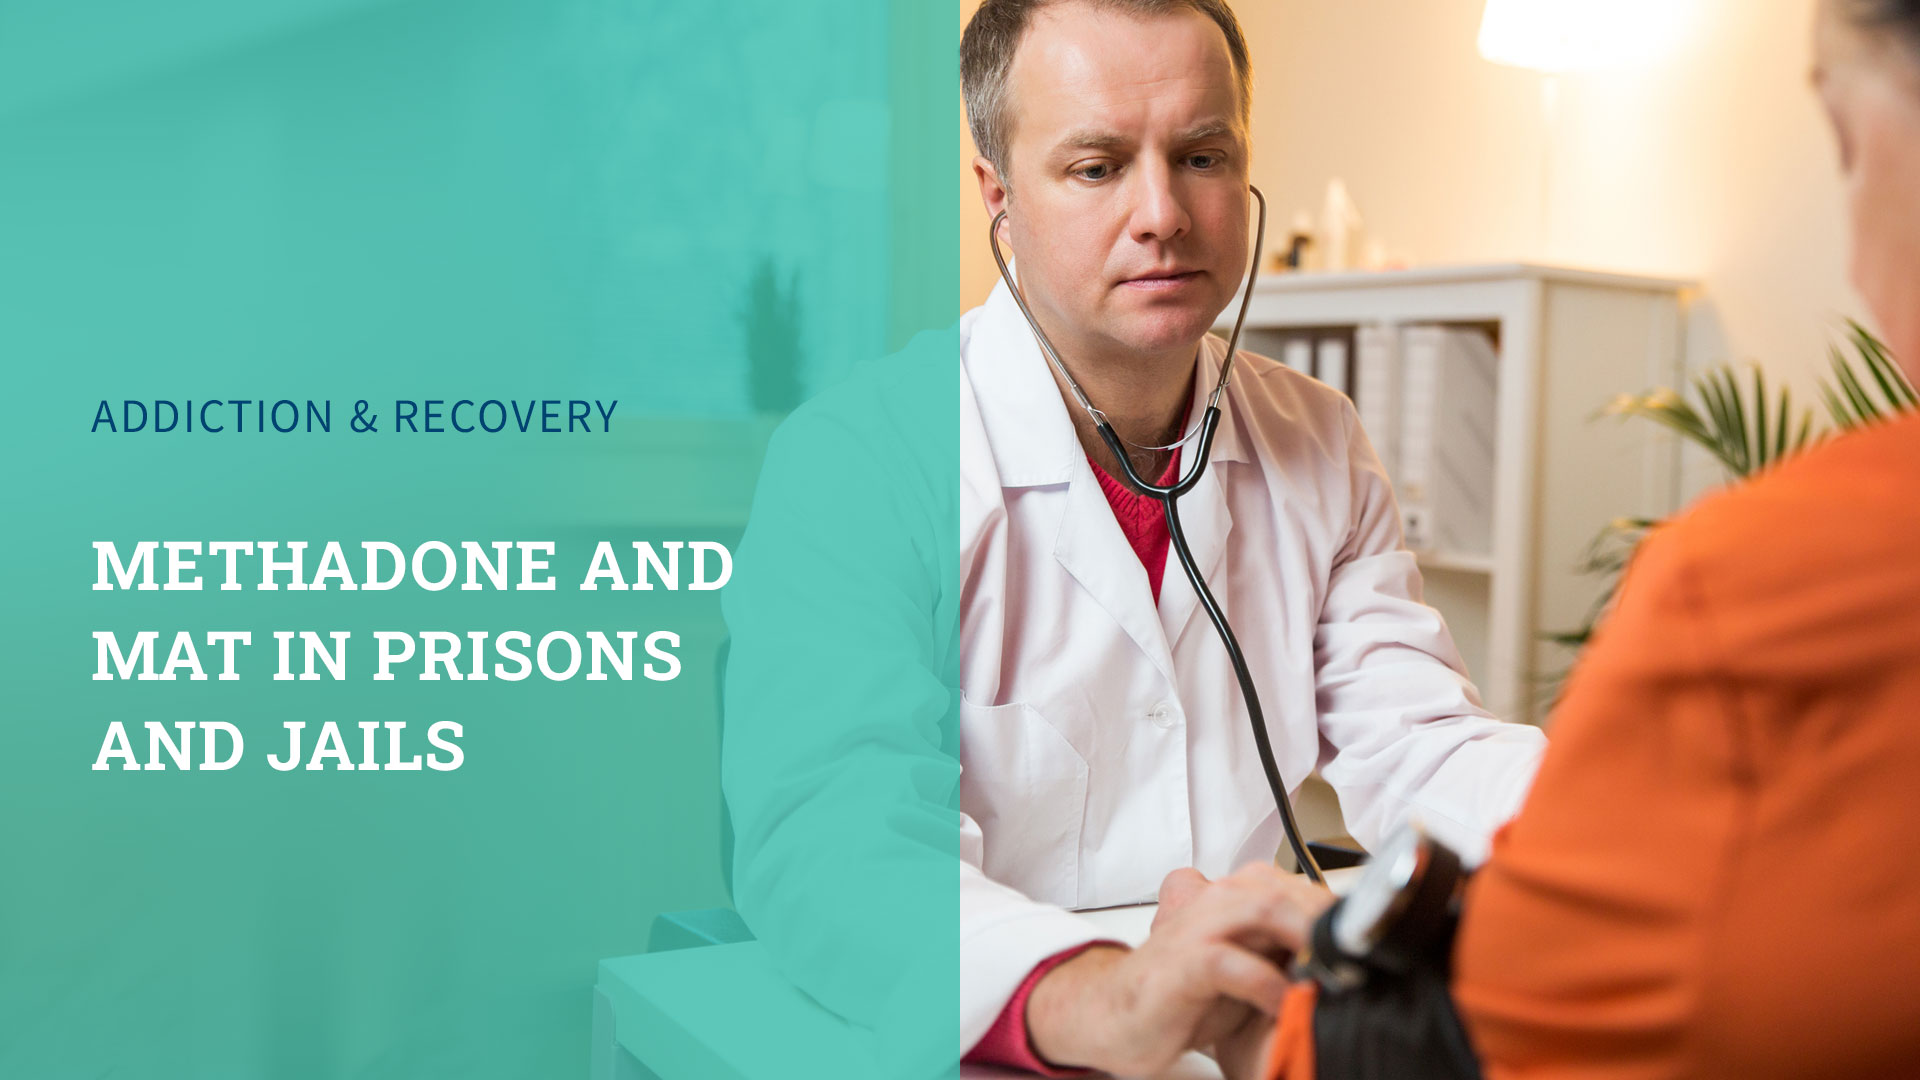 Methadone and MAT in Prisons and Jails